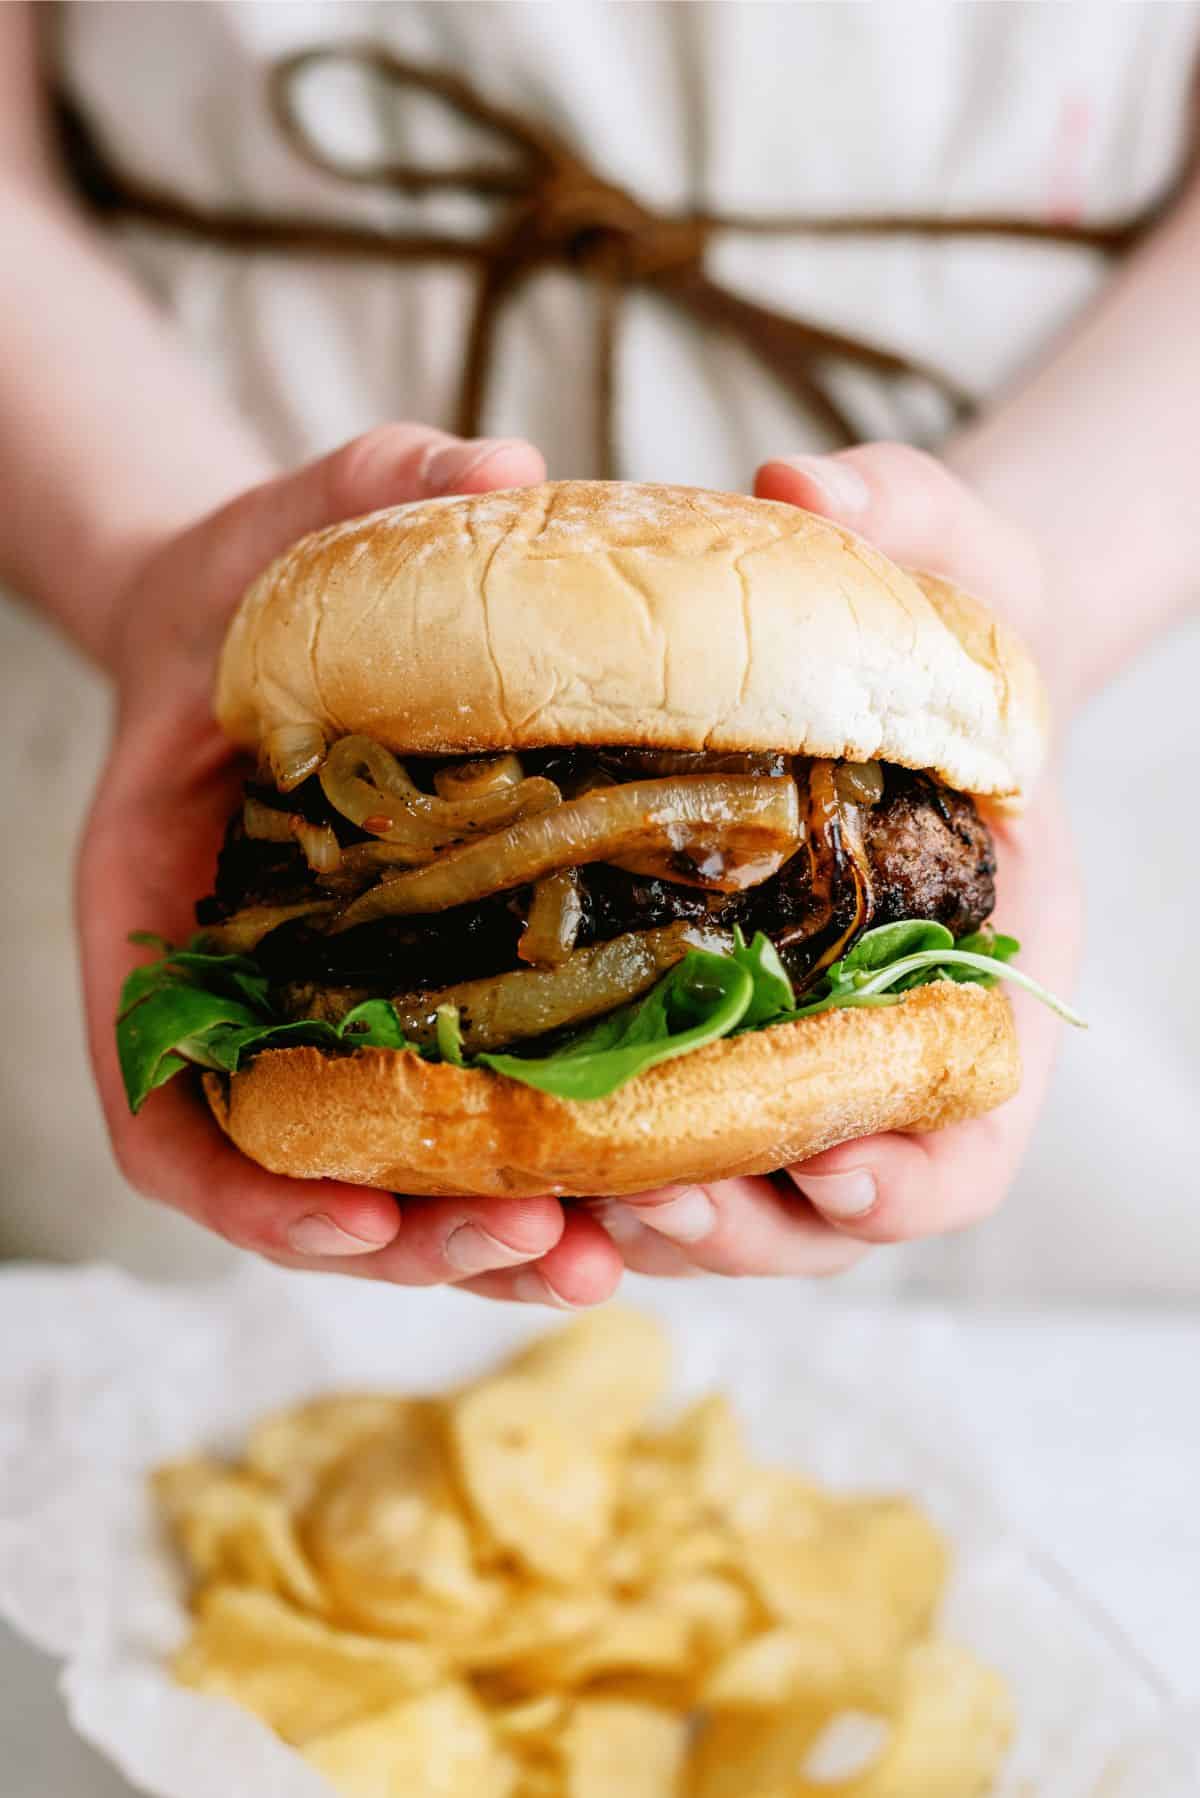 Holding a Grilled Teriyaki Burger with toppings